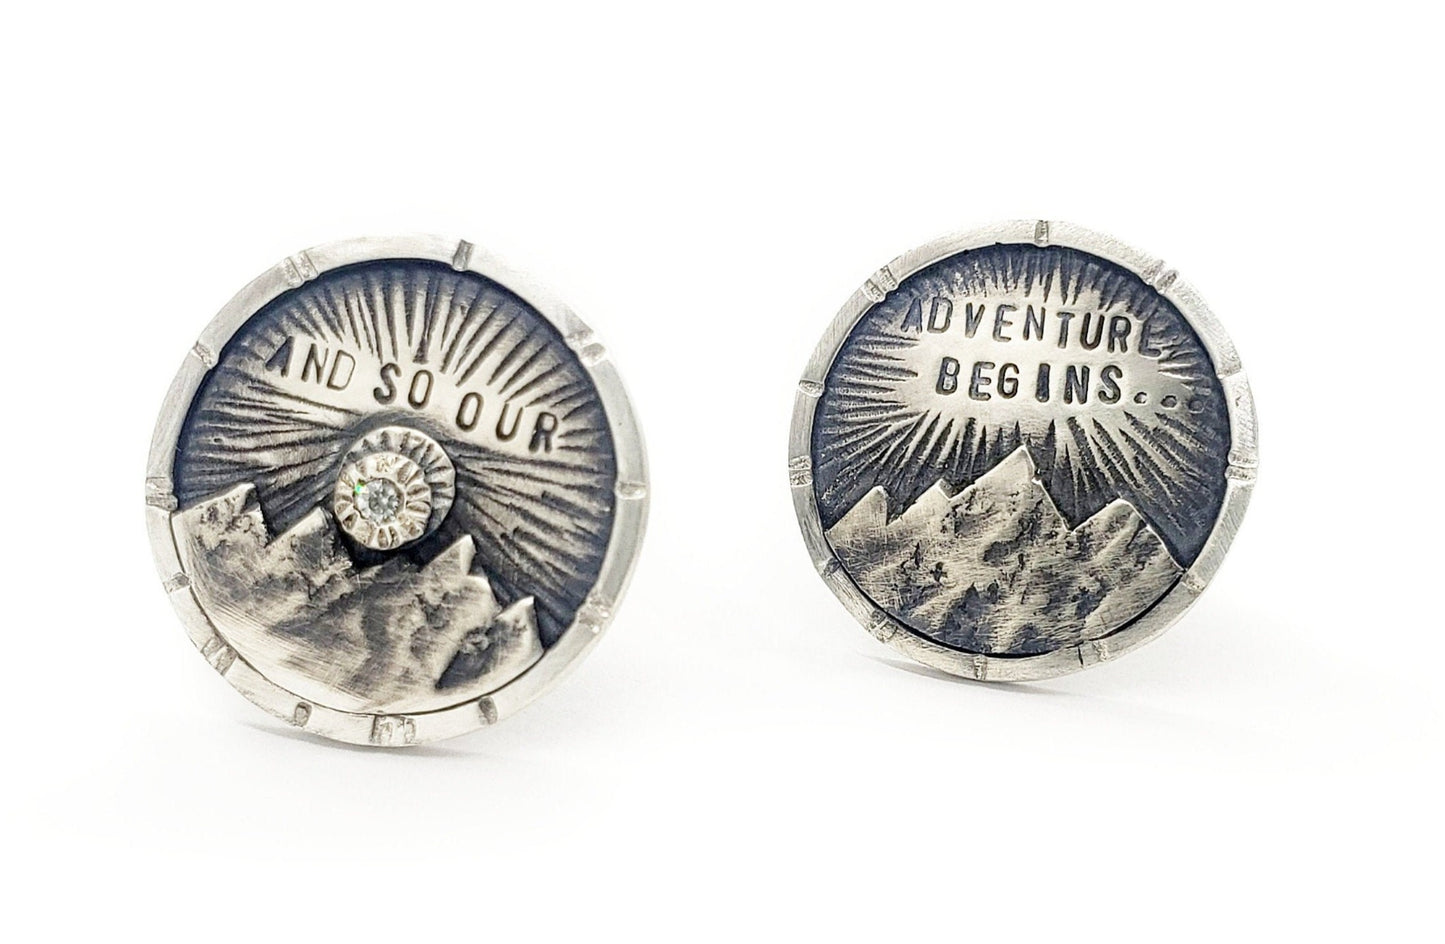 Our Adventure - Cuff Links